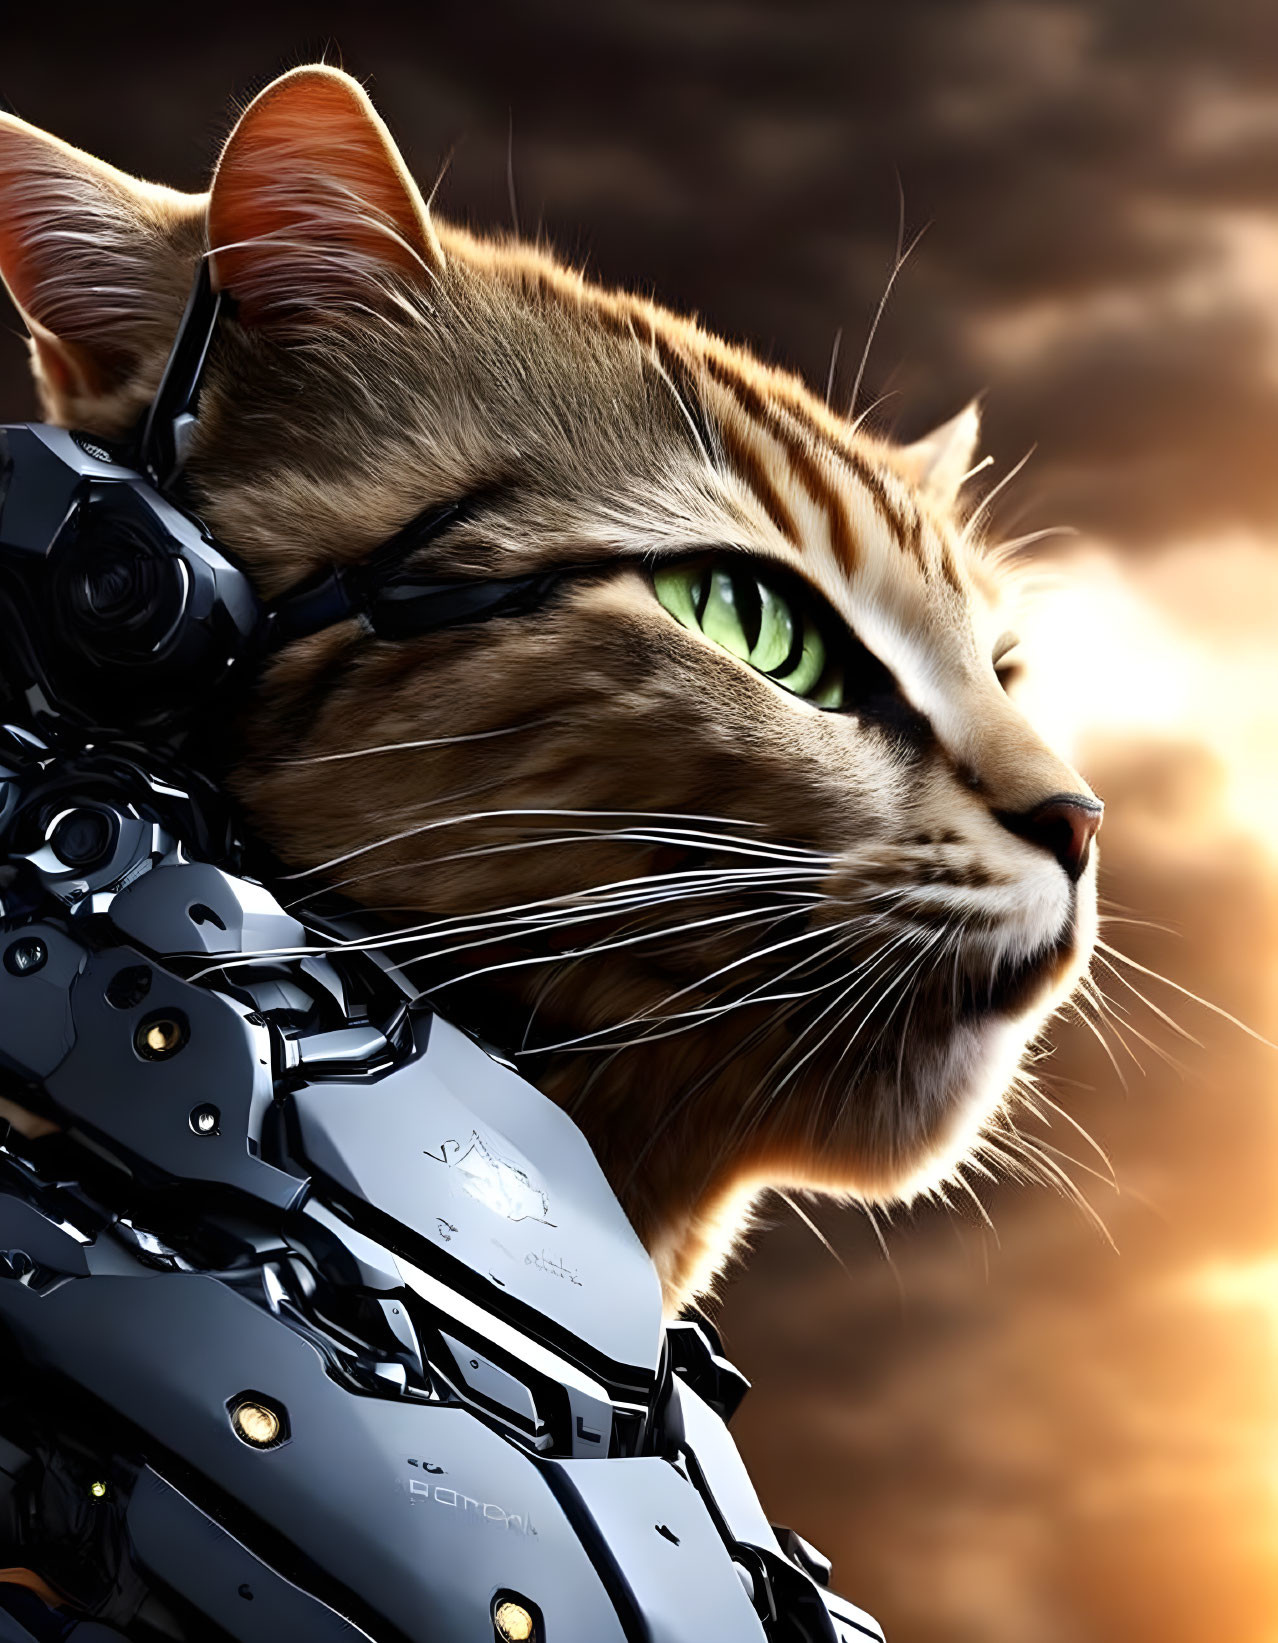 Digital artwork: Cat with mechanical neck and shoulder against dramatic sky